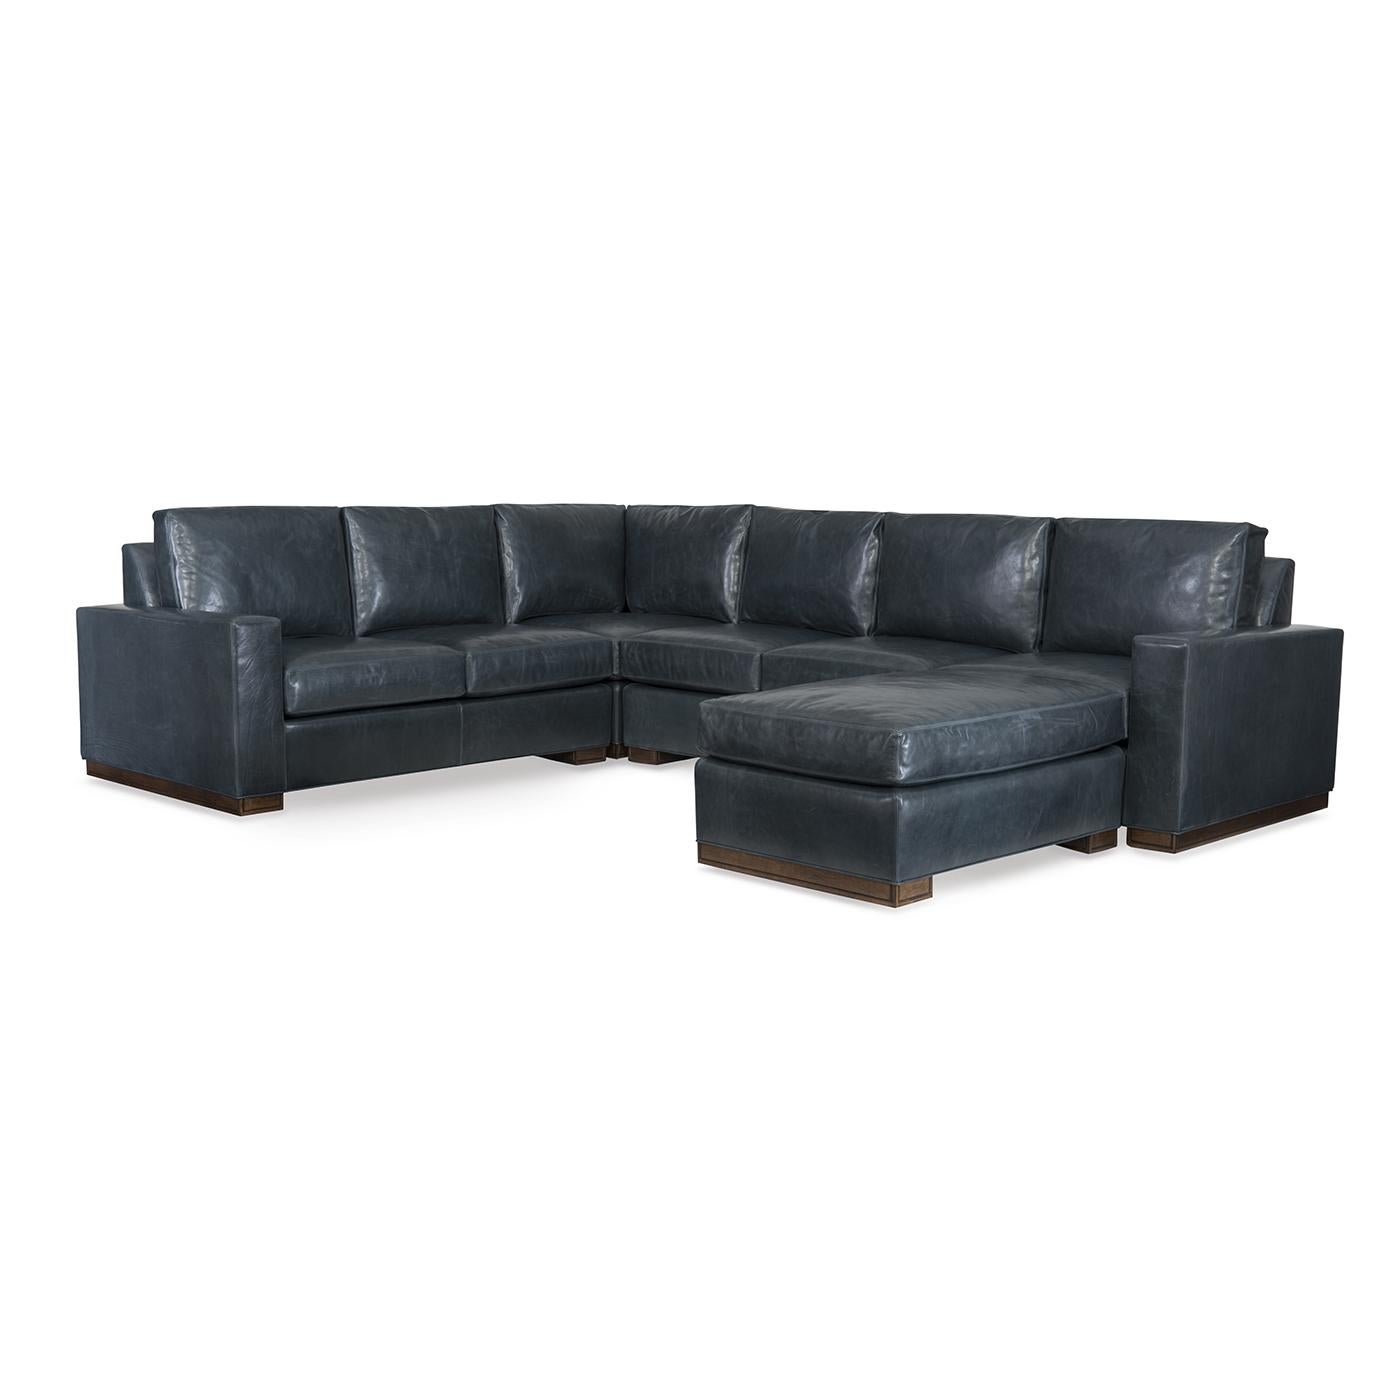 Modern leather upholstered sofa with bold modern lines and raised on bold block supports. Loose pillow backs with boxed comfort down seat cushions.

Completely Made in USA, with traditional 8-way hand-tied construction and US grown - toxin-free -